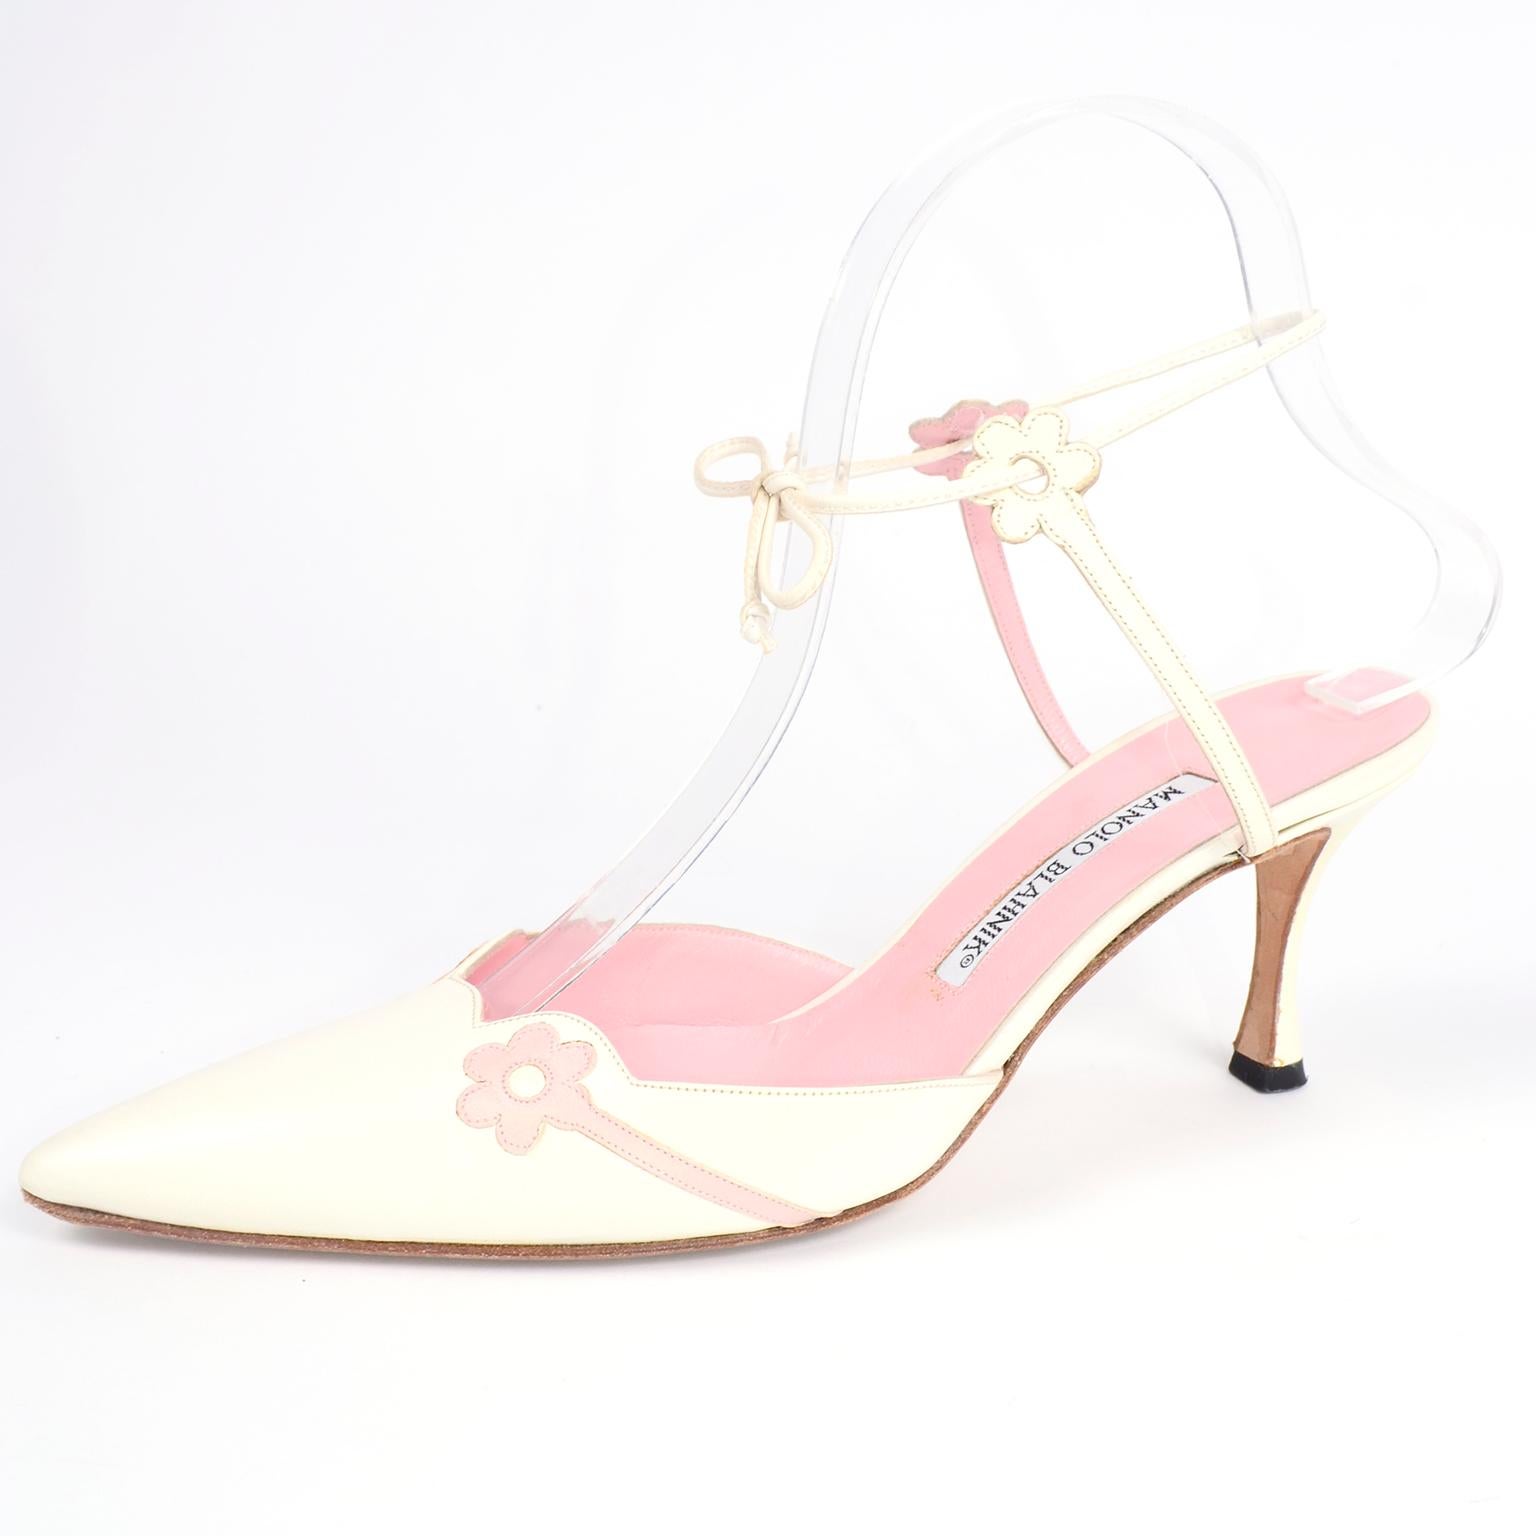 Women's Ivory Leather Manolo Blahnik Shoes With Pink Daisy Flowers and Ankle Straps